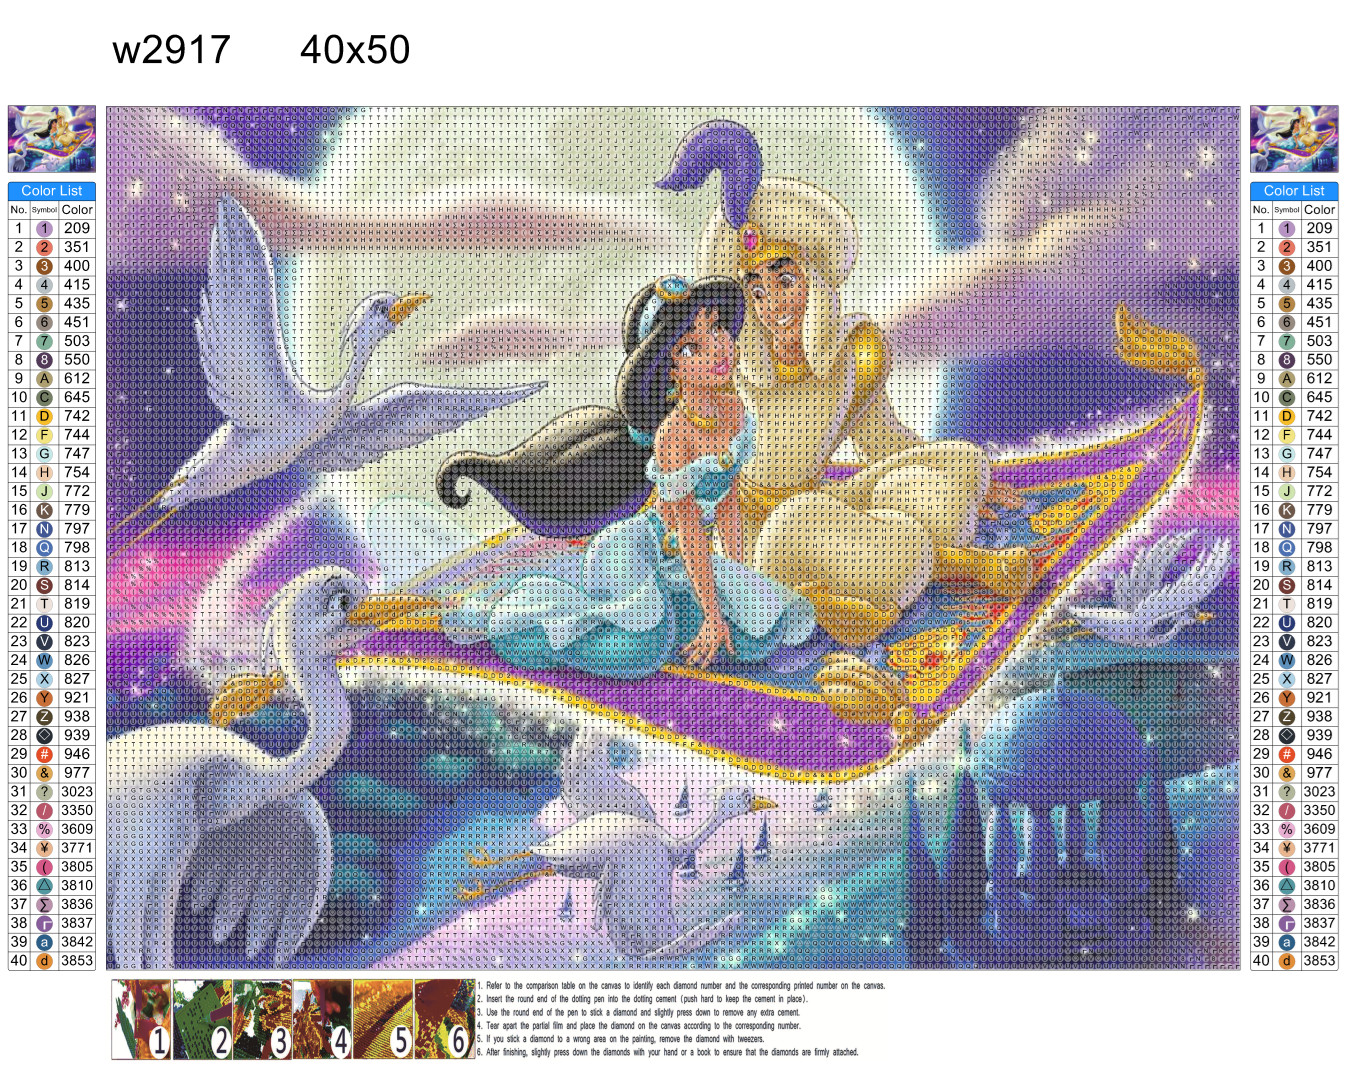 Flying Carpet Princess Jasmine and Prince 40*50cm (canvas) full round drill(40 colors) diamond painting